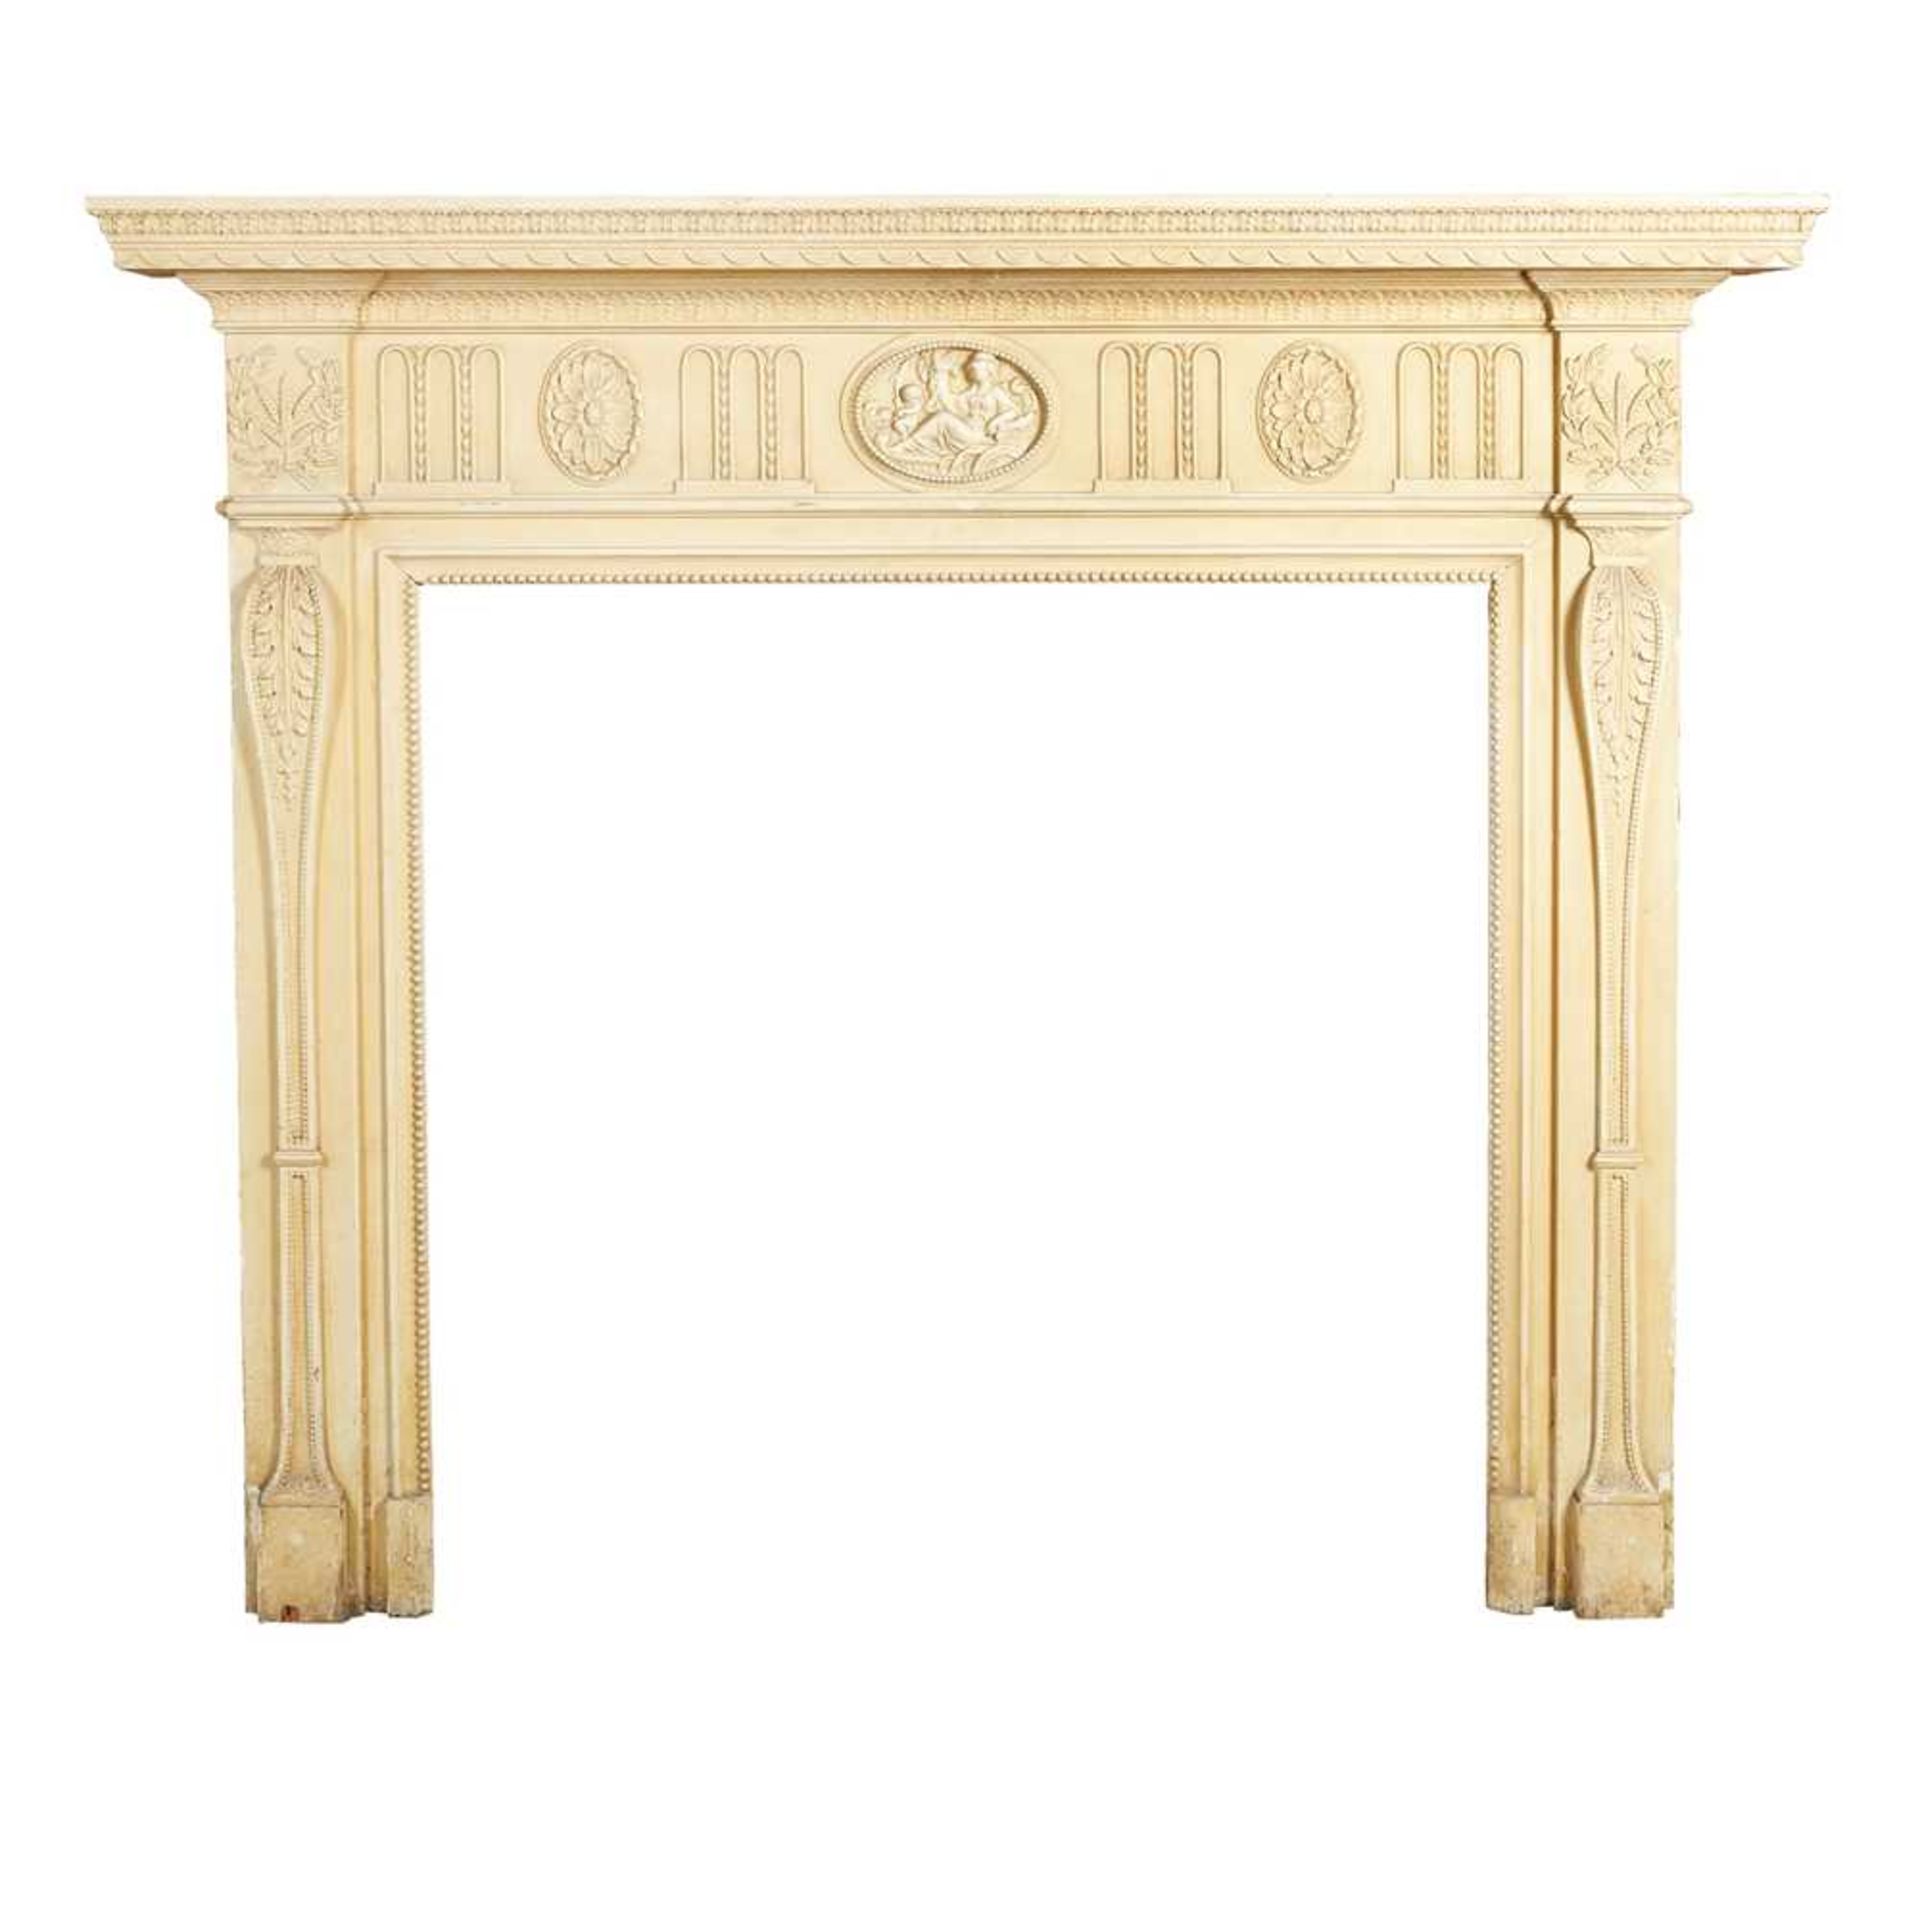 A LATE GEORGIAN PAINTED PINE AND GESSO FIRE SURROUND EARLY 19TH CENTURY